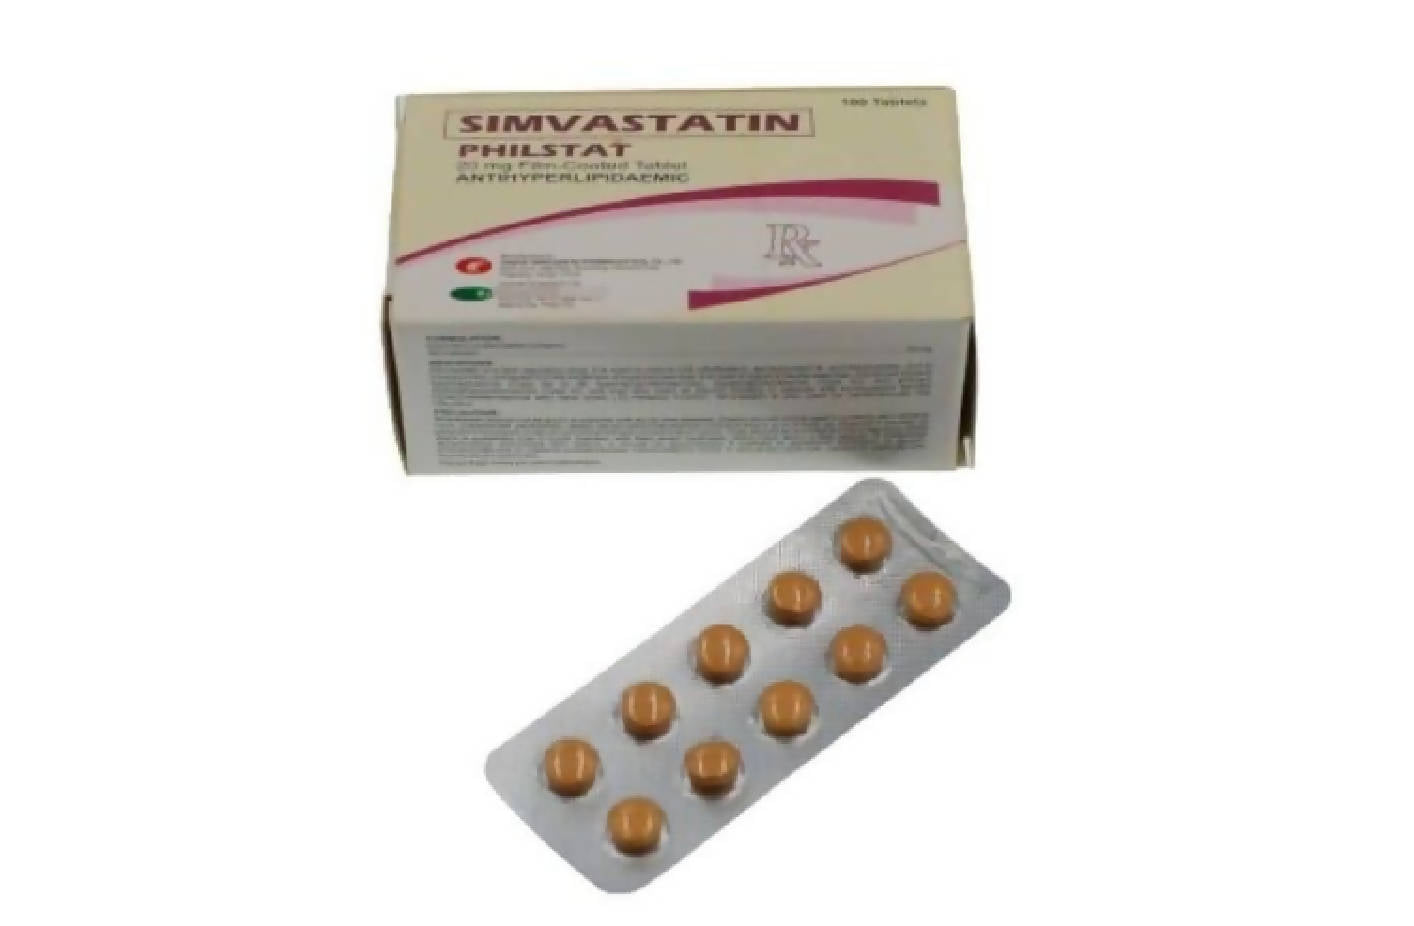 simvastatin-20mg-tablet-x-30s-monthly-dose-pack